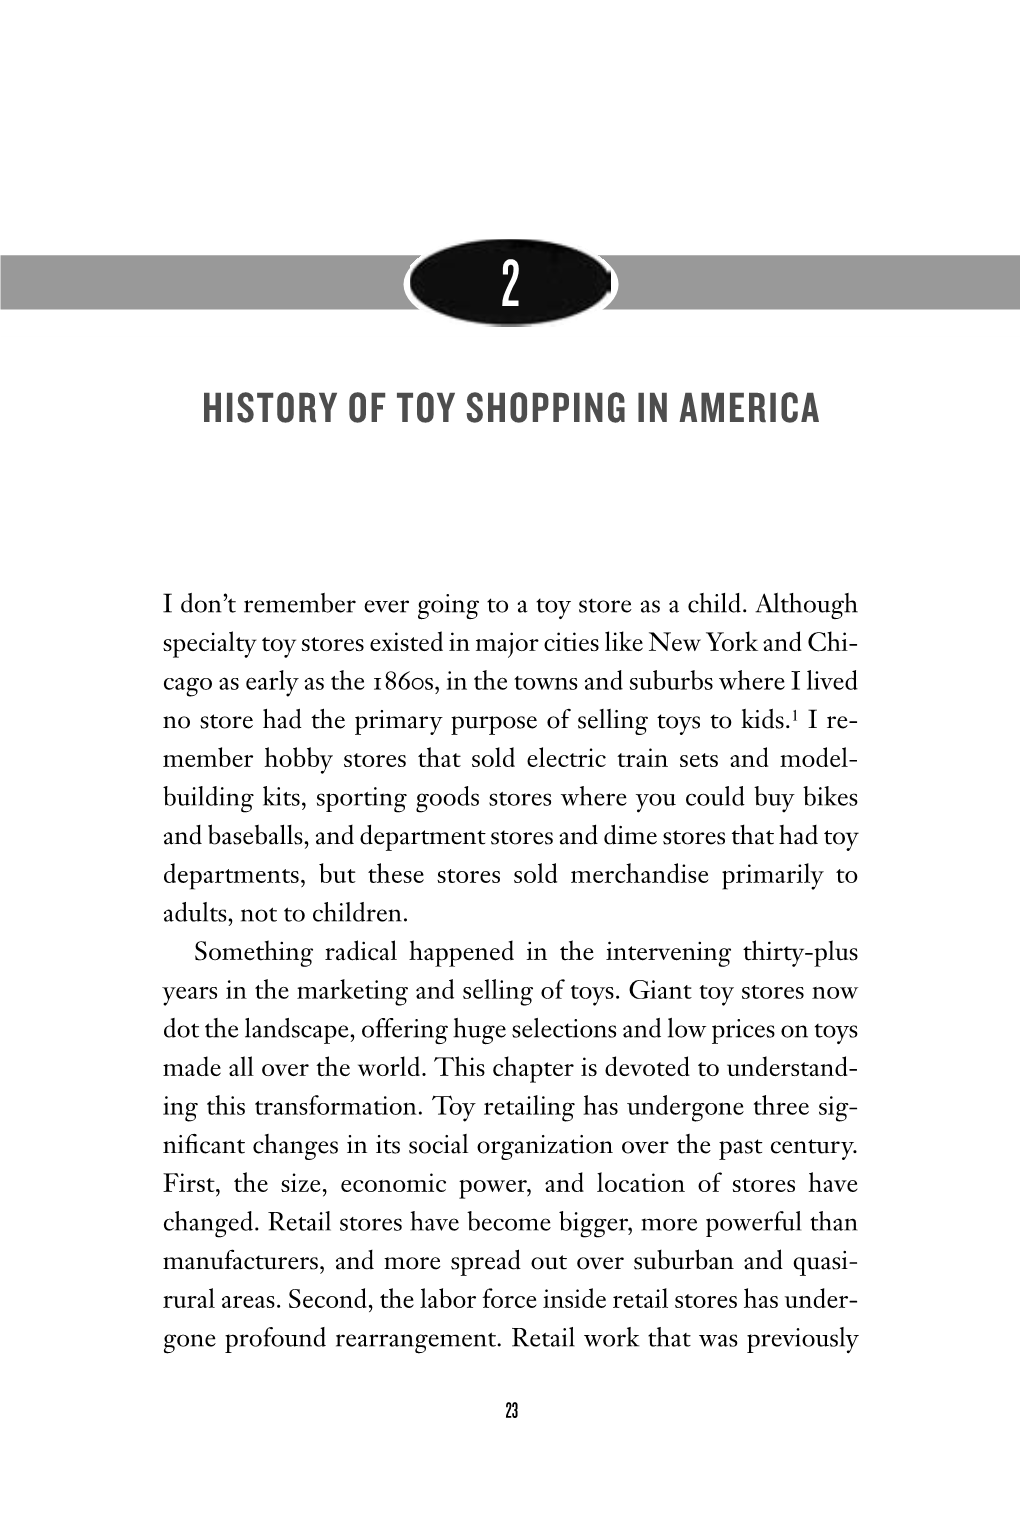 History of Toy Shopping in America